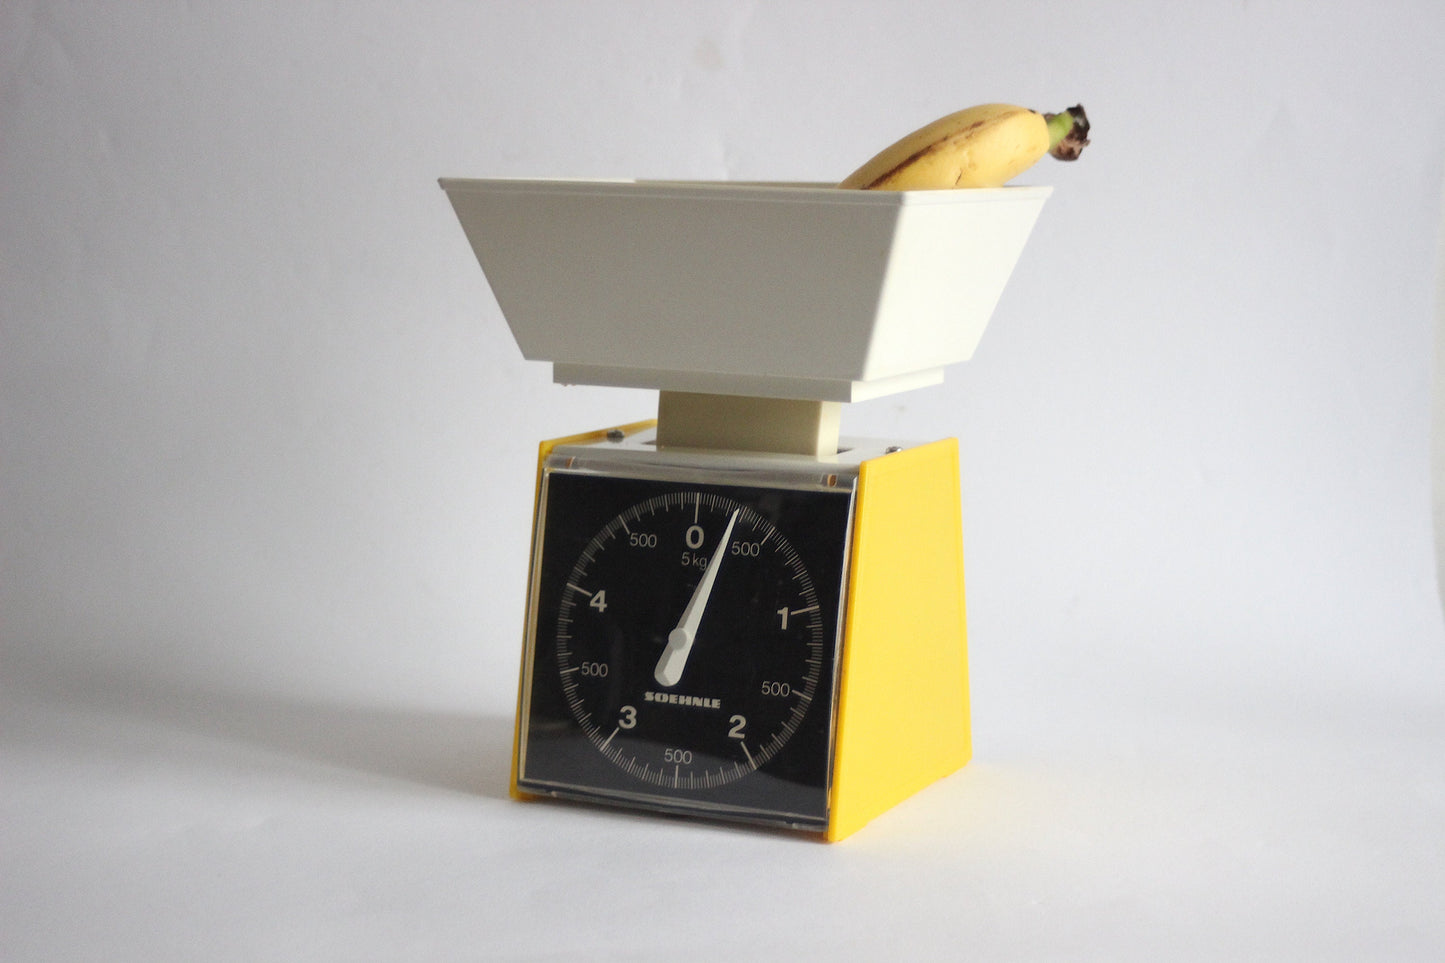 SOEHNLE Space age vintage kitchen scale. Yellow and white. Model 1200. Germany, 70s.